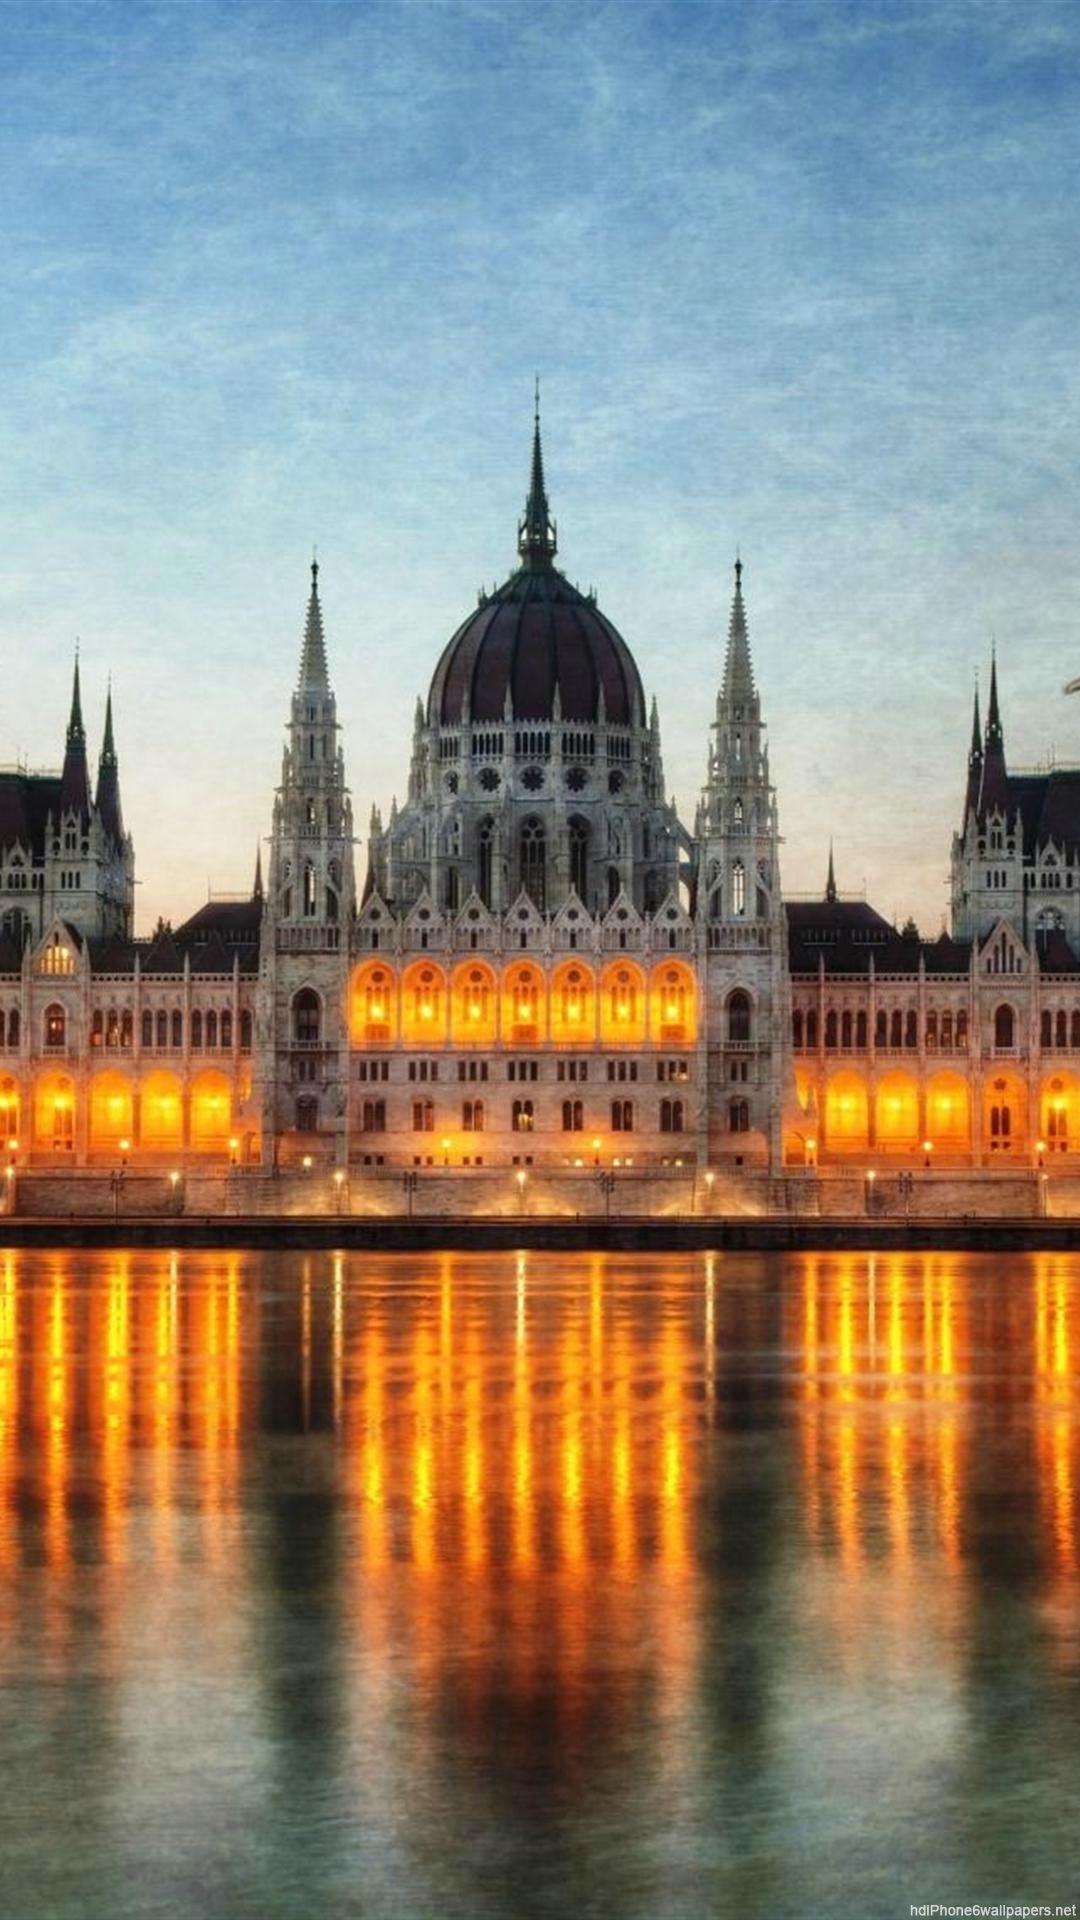 budapest parliament iPhone 6 wallpaper HD and 1080P 6 Plus Wallpaper